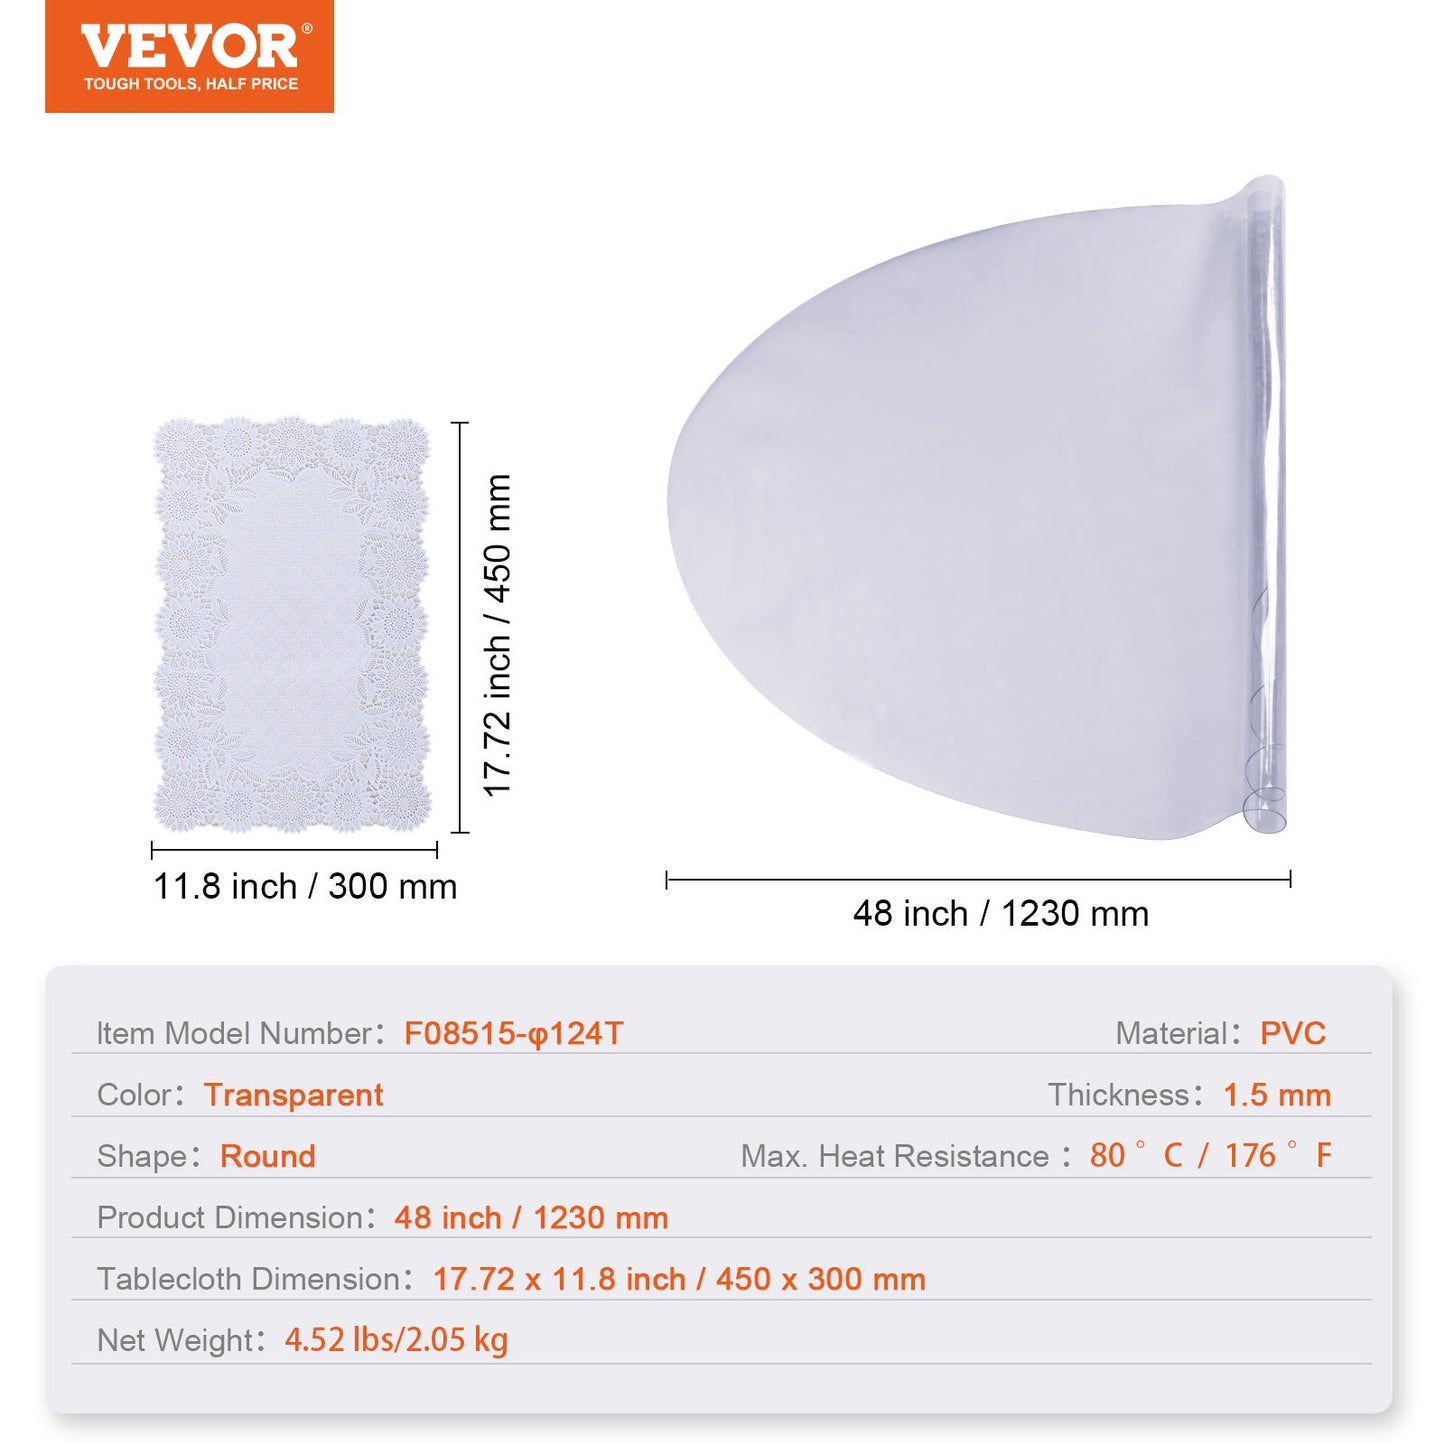 Clear Table Cover Protector, 48 inch/1230 mm Round Table Cover, 1.5 mm Thick PVC Plastic Tablecloth, Waterproof Desktop Protector for Writing Desk, Coffee Table, Dining Room Table